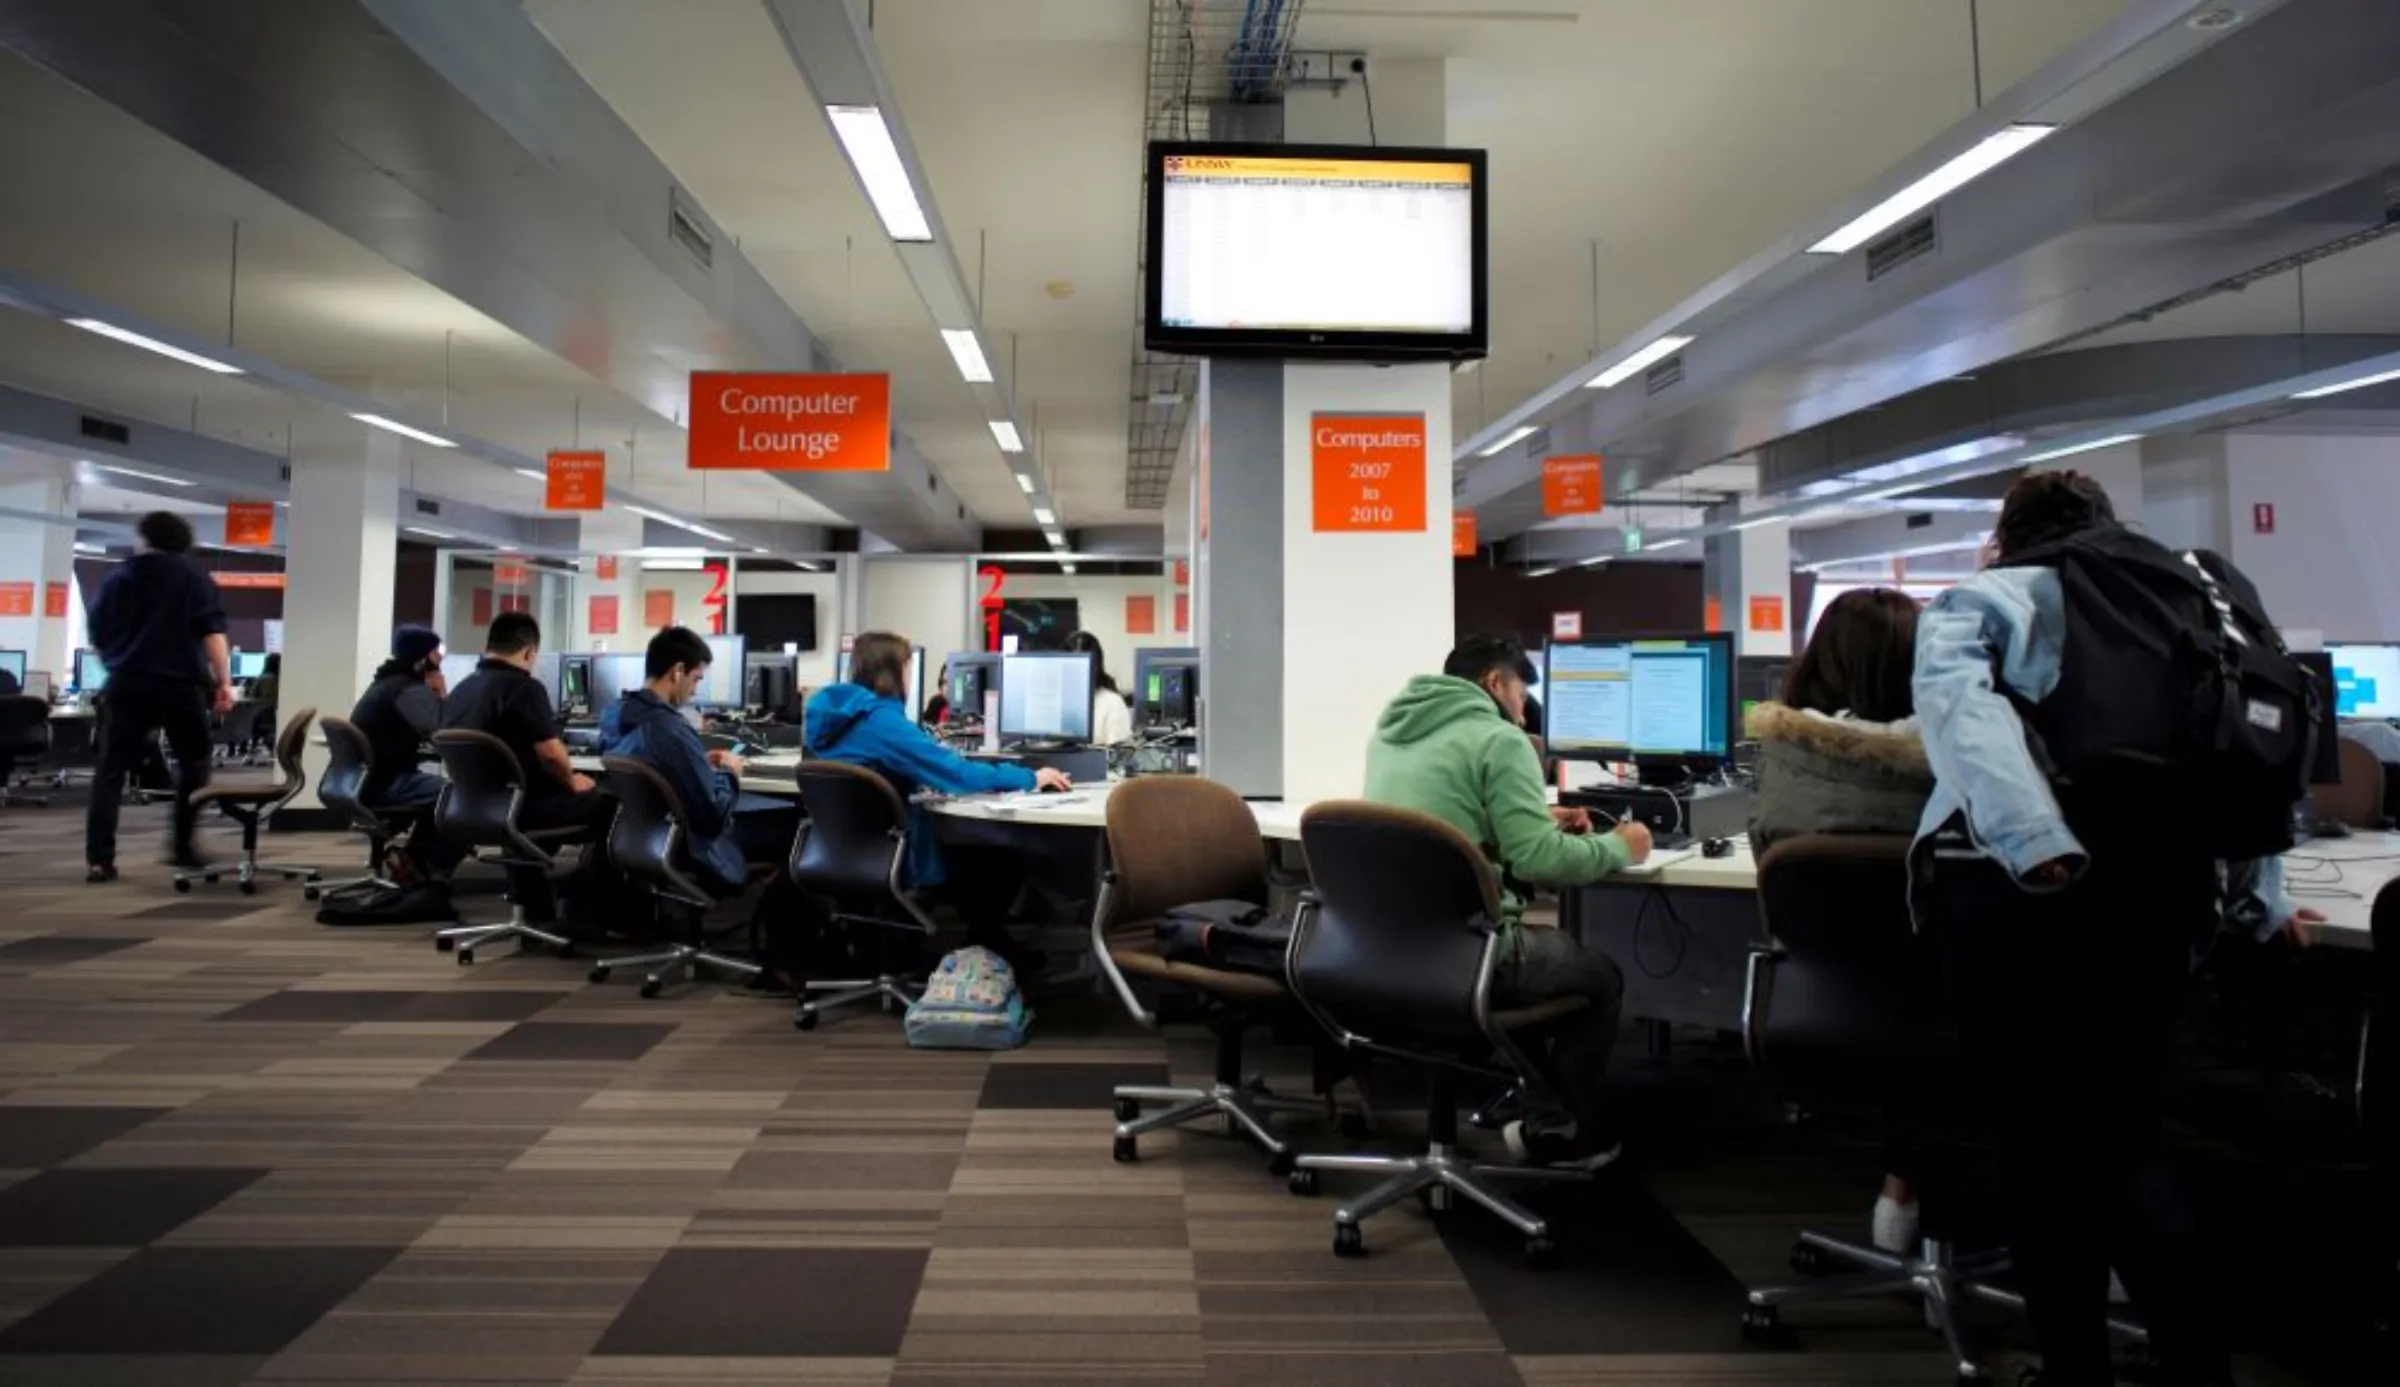 Students work on computers in the computer lounge at the campus of the University of New South Wales in Sydney, Australia, August 4, 2016